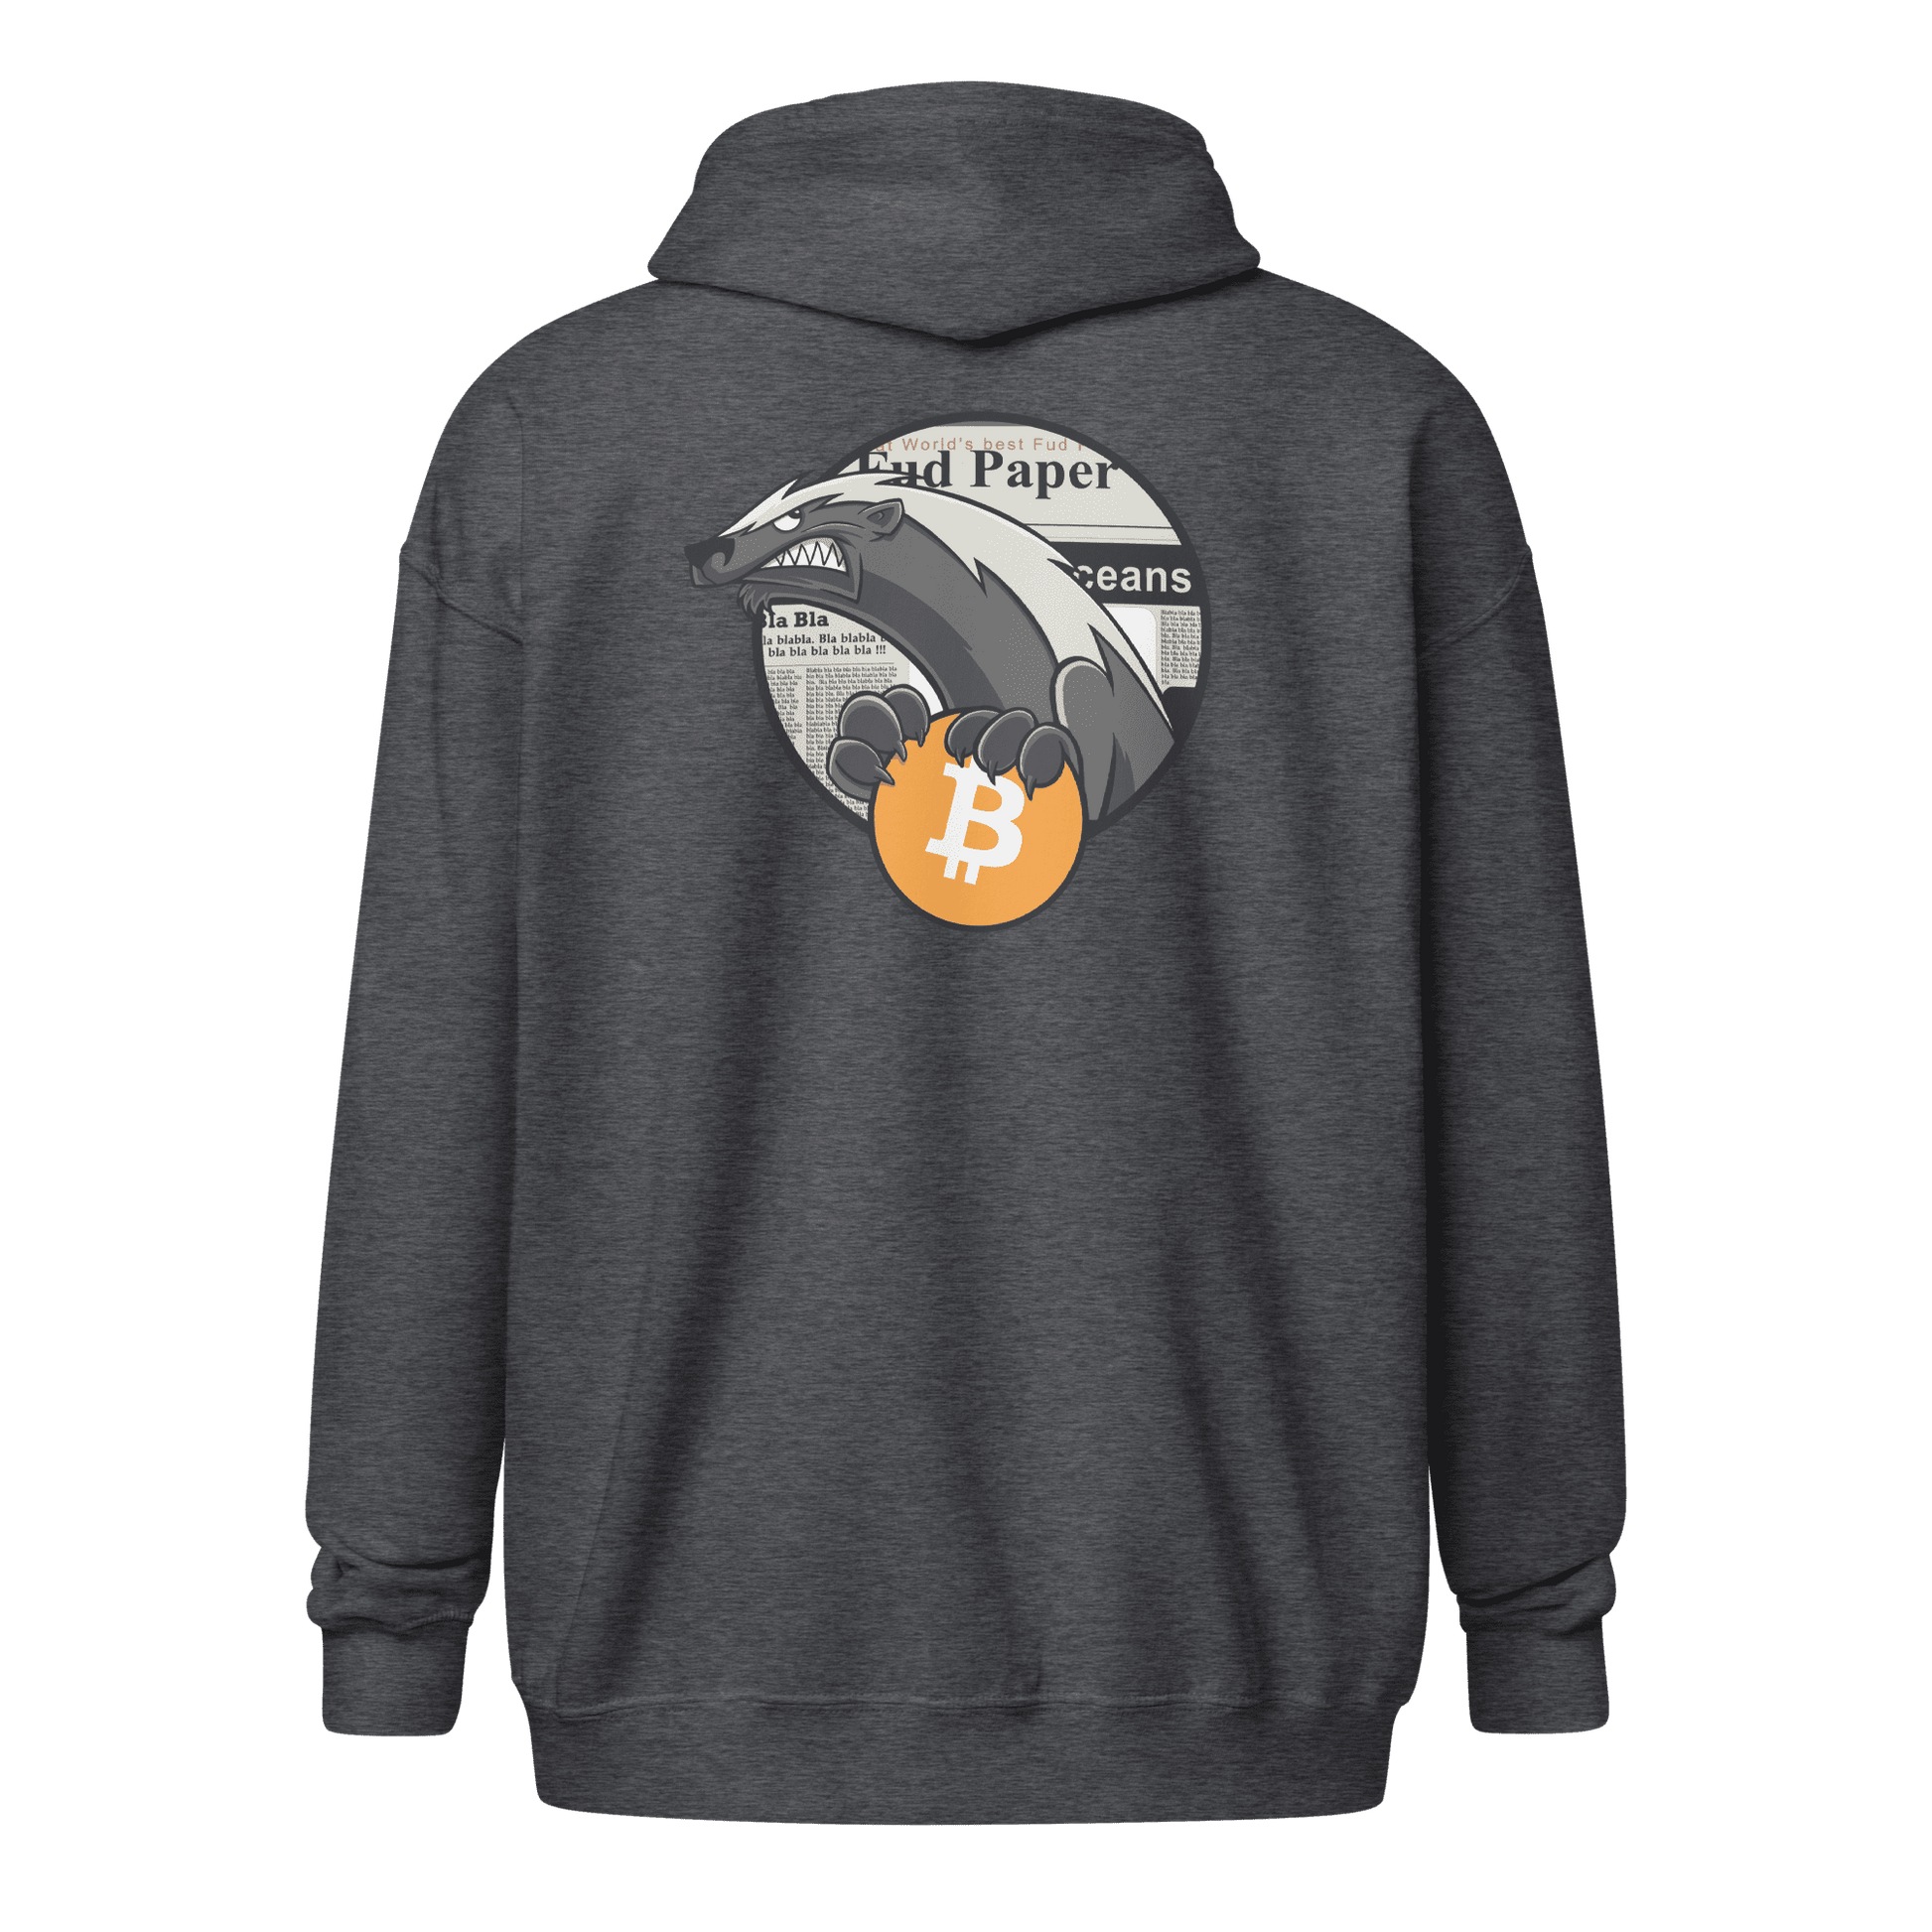 Back view of a dark heather grey colored bitcoin zip hoodie.